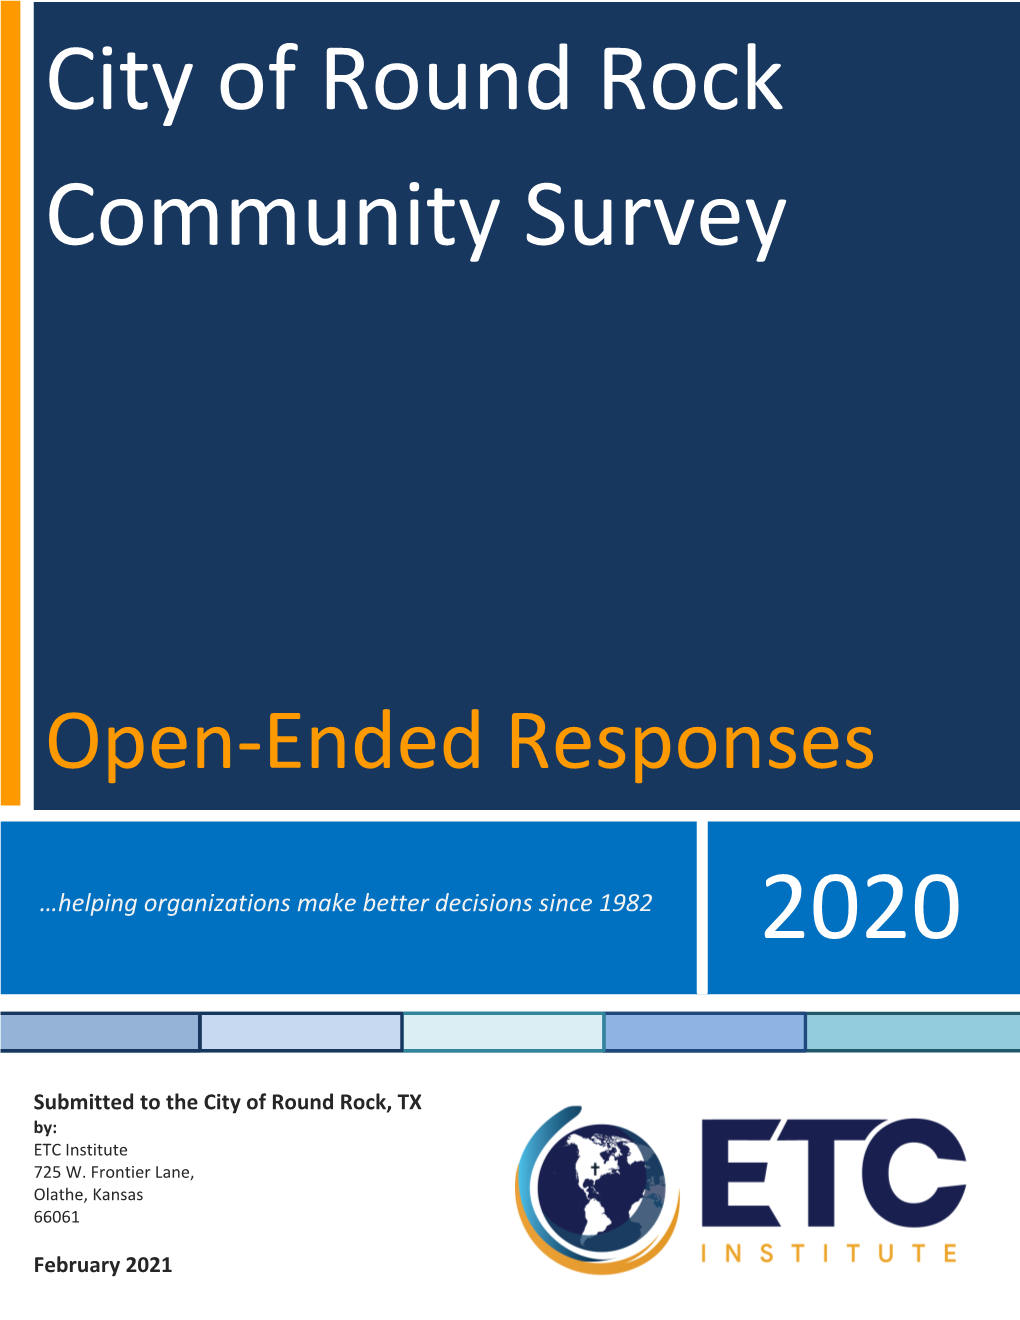 City of Round Rock Community Survey: Open-Ended Responses